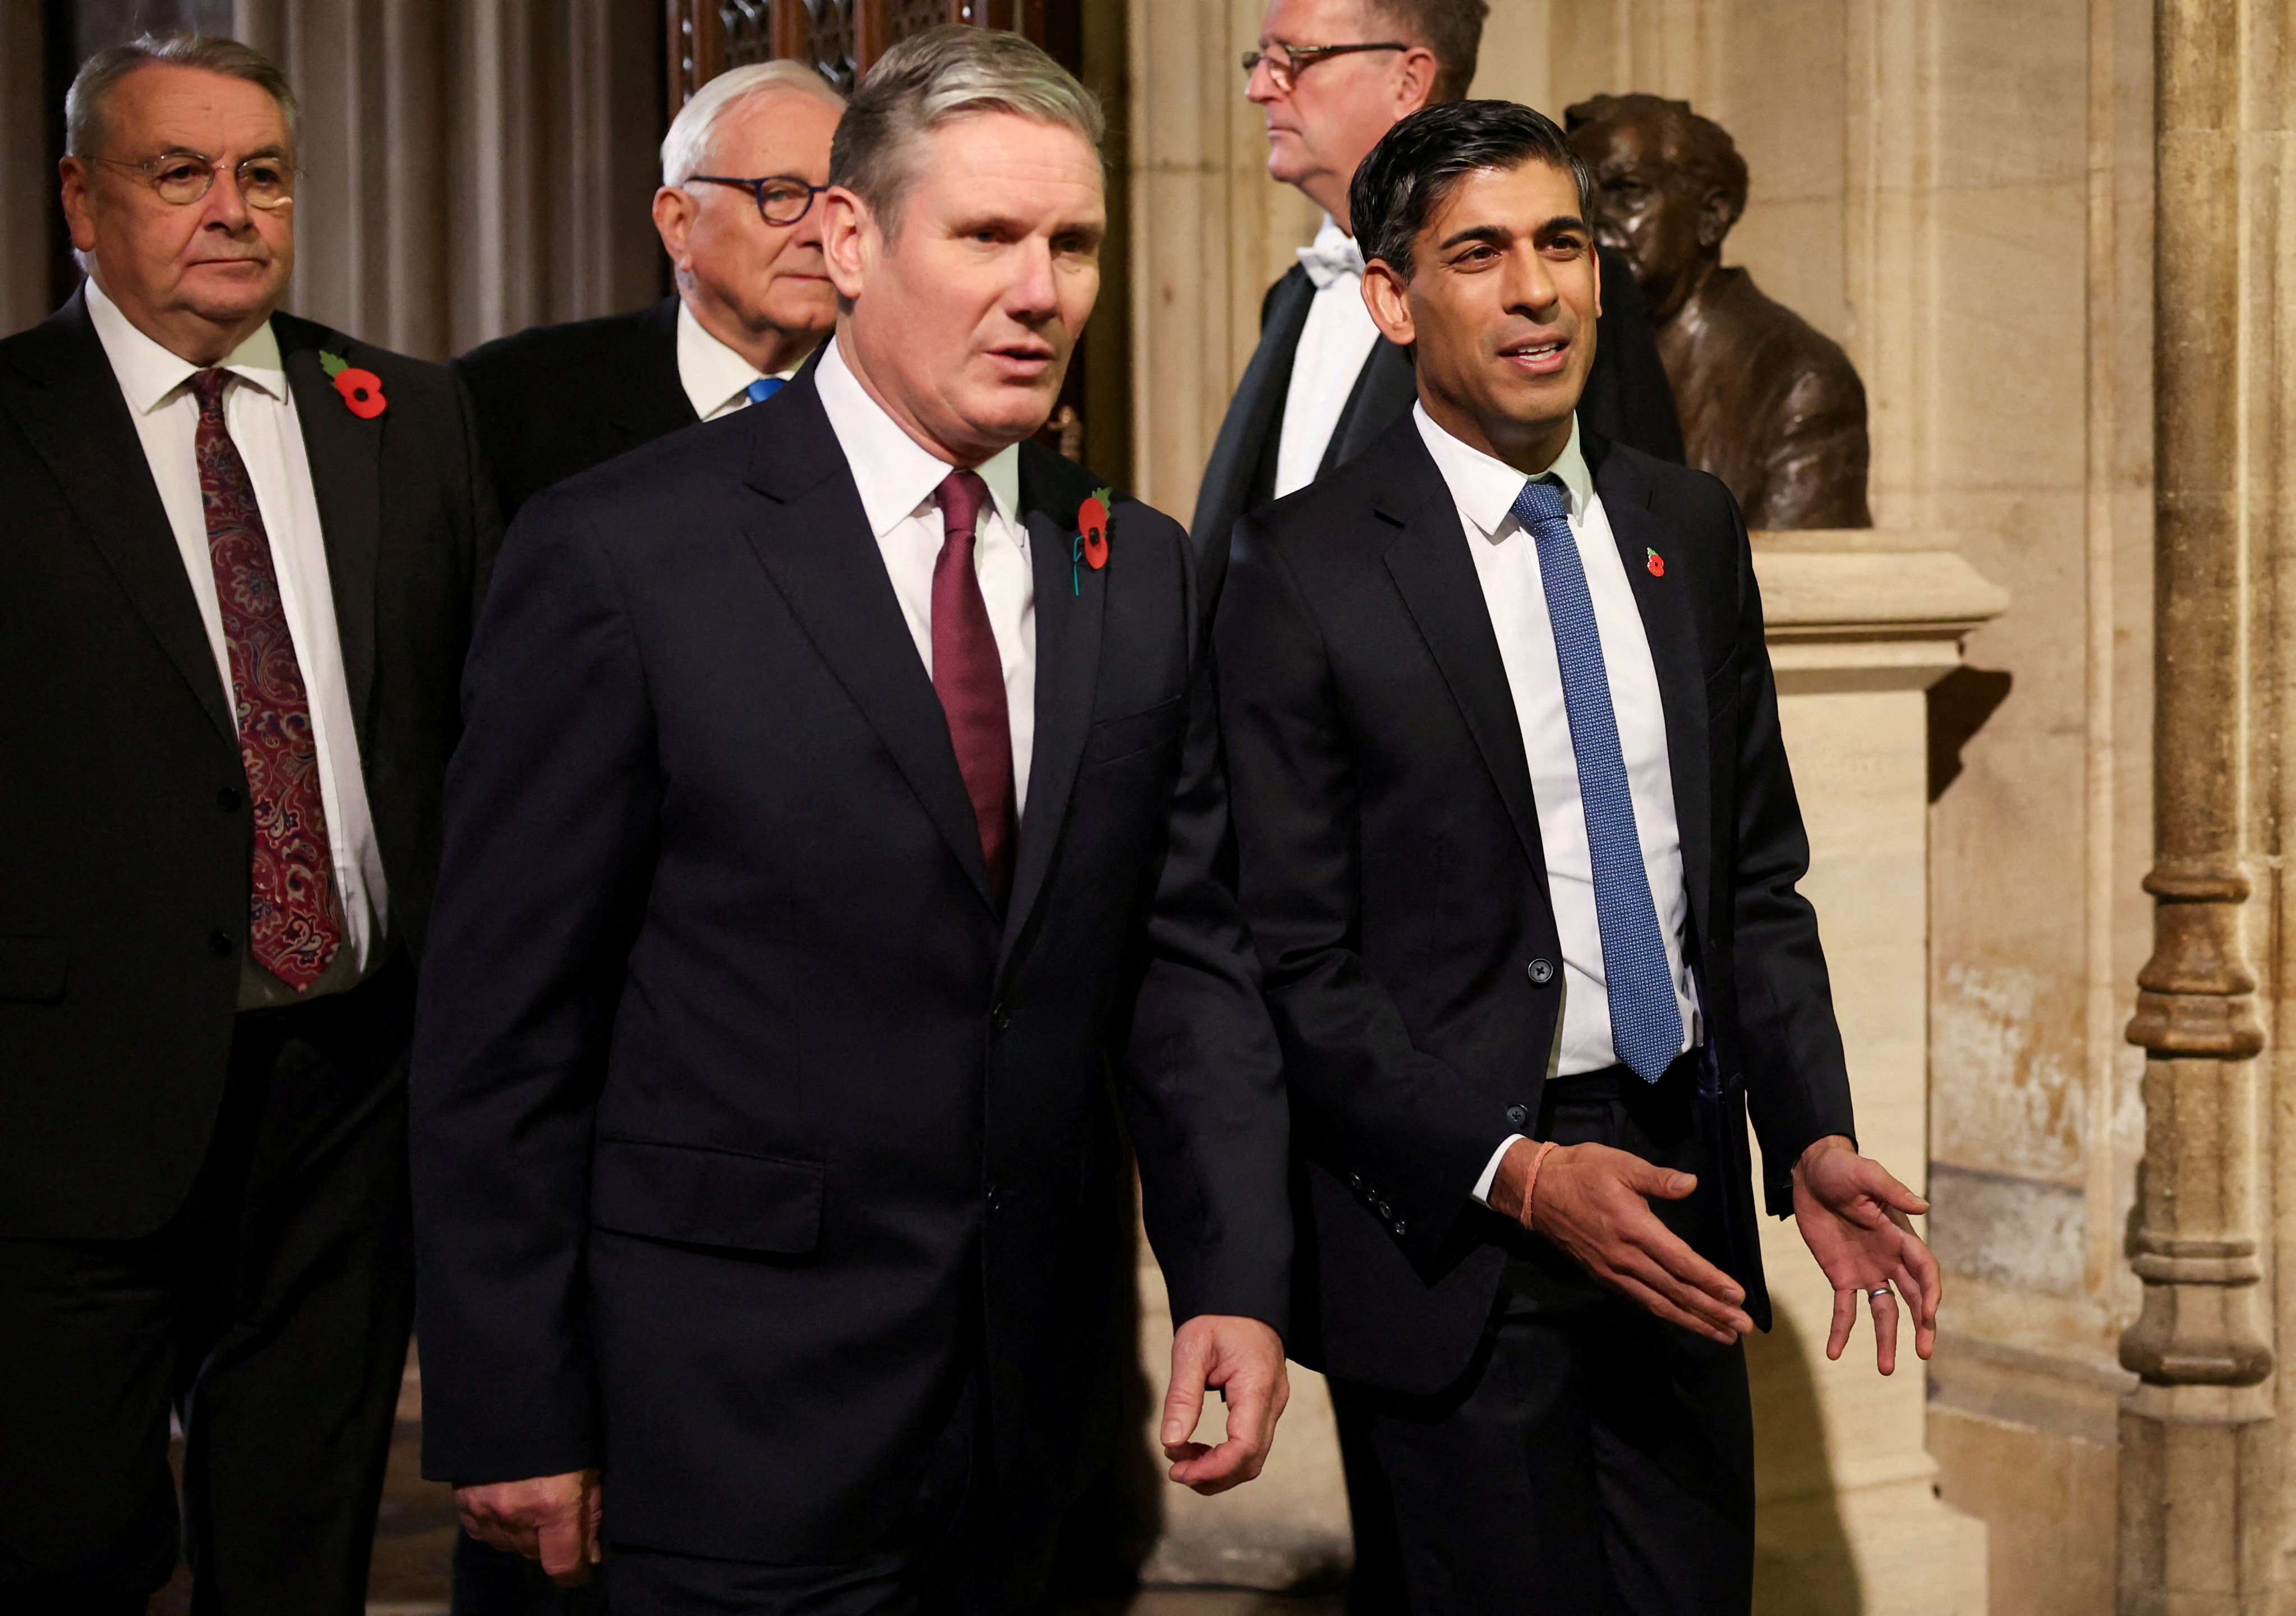 Labour Party leader Sir Keir Starmer walks with Britain's Prime Minister Rishi Sunak during the State Opening of Parliament ceremony, at the Houses of Parliament